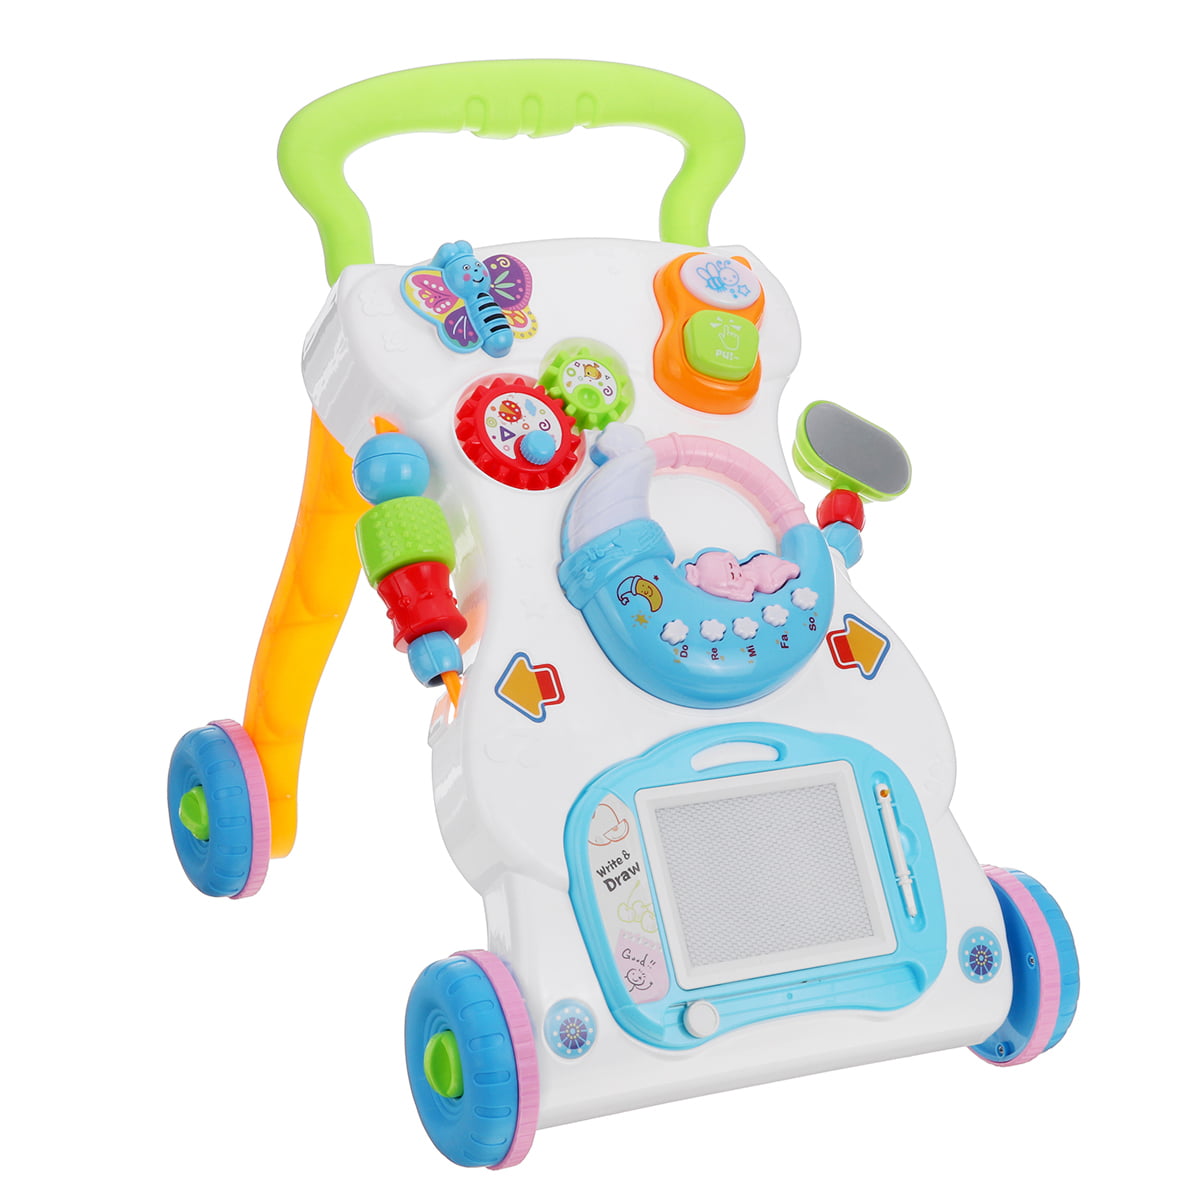 Rubber Wheels Push /& Pull Toys caterbee Sit to Stand Learning Walker,Beginnings Activity Walker with Musical and Light,Adjustable Speed